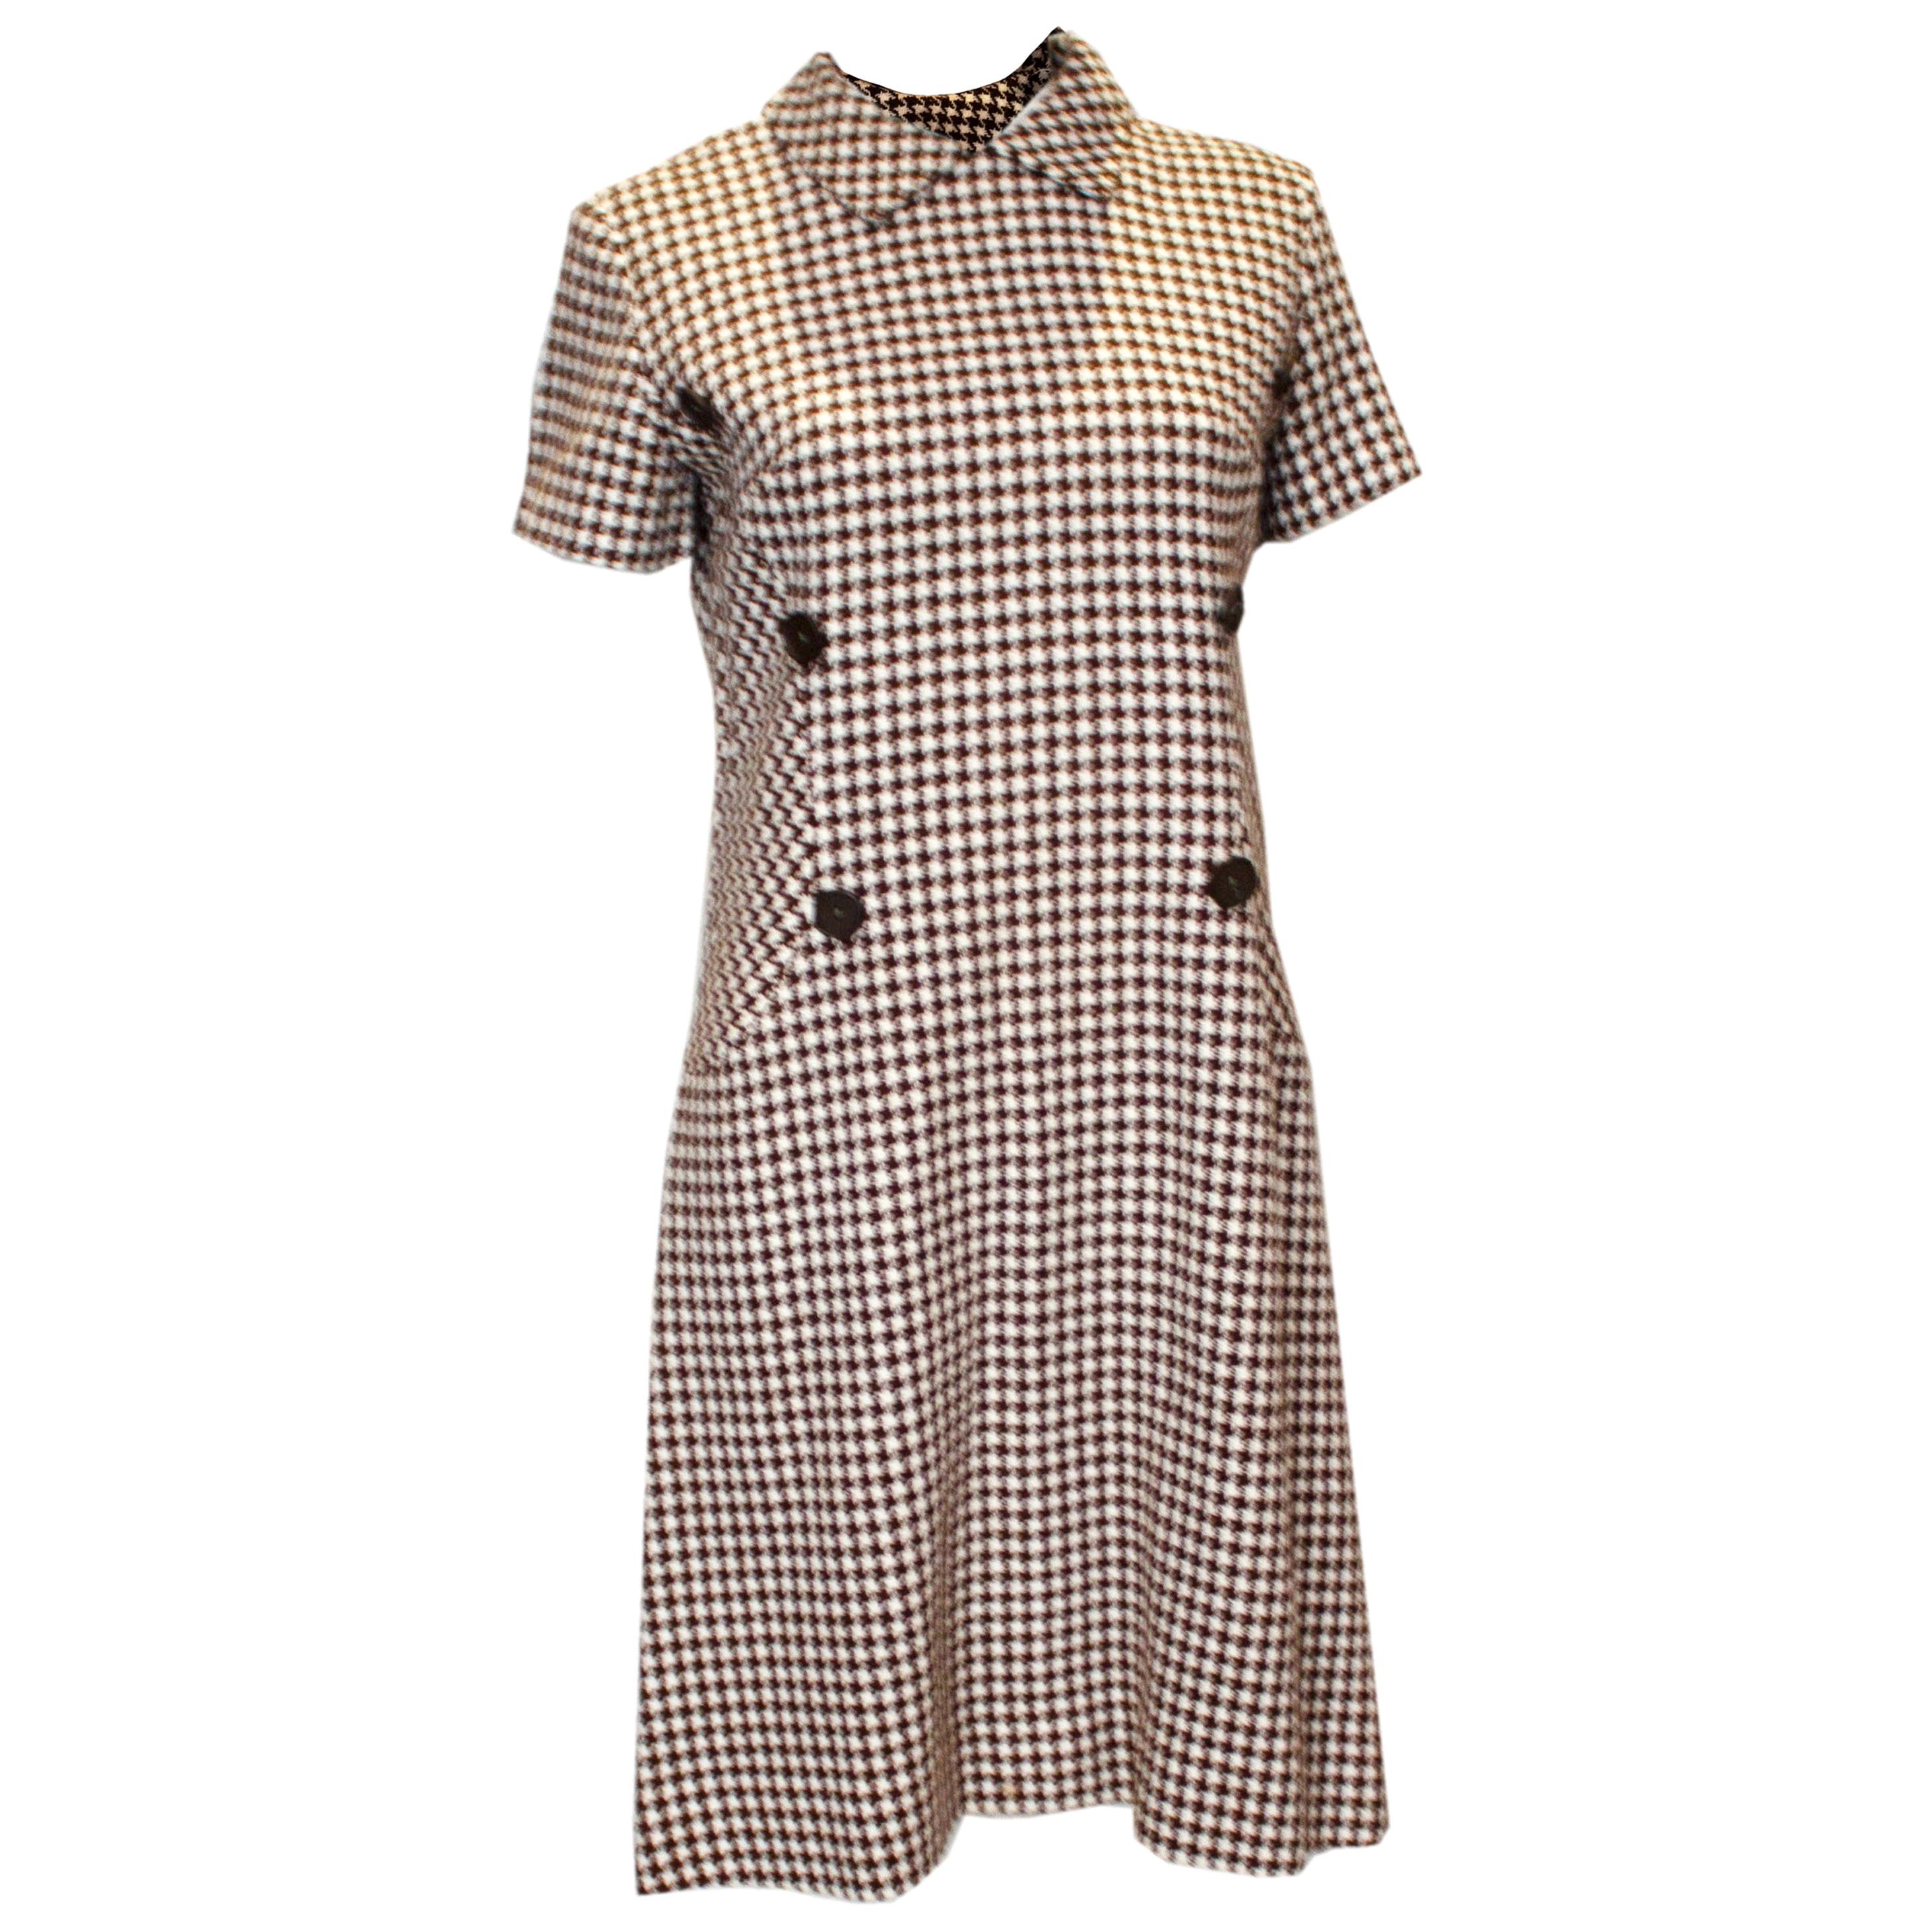 Vintage Brown and White Dress by Nancy Green For Sale